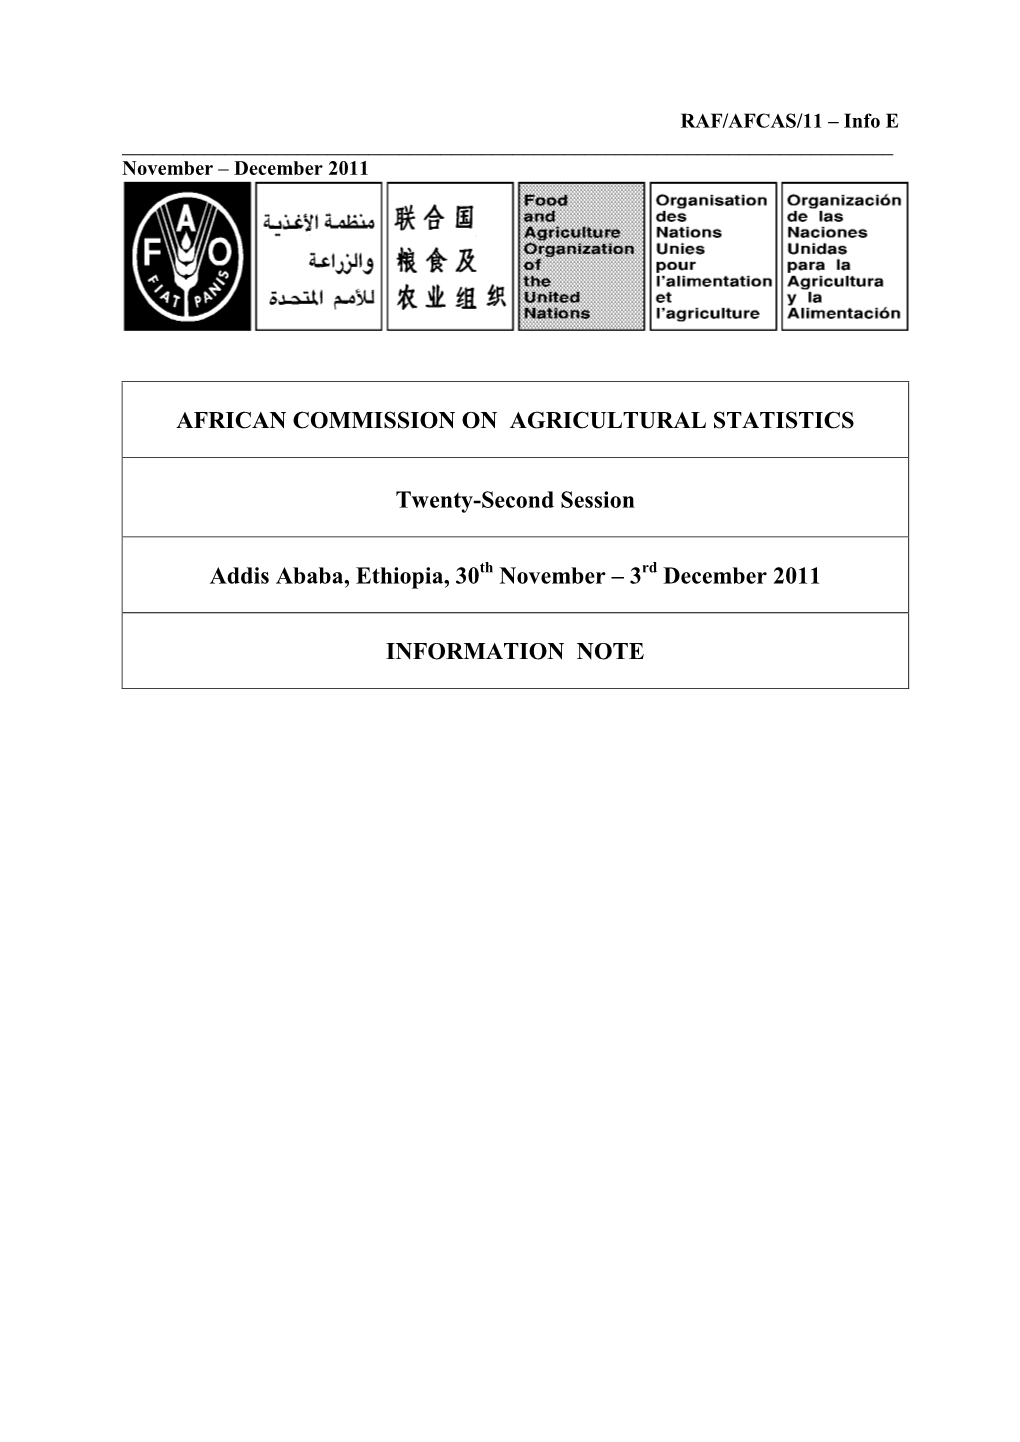 African Commission on Agricultural Statistics